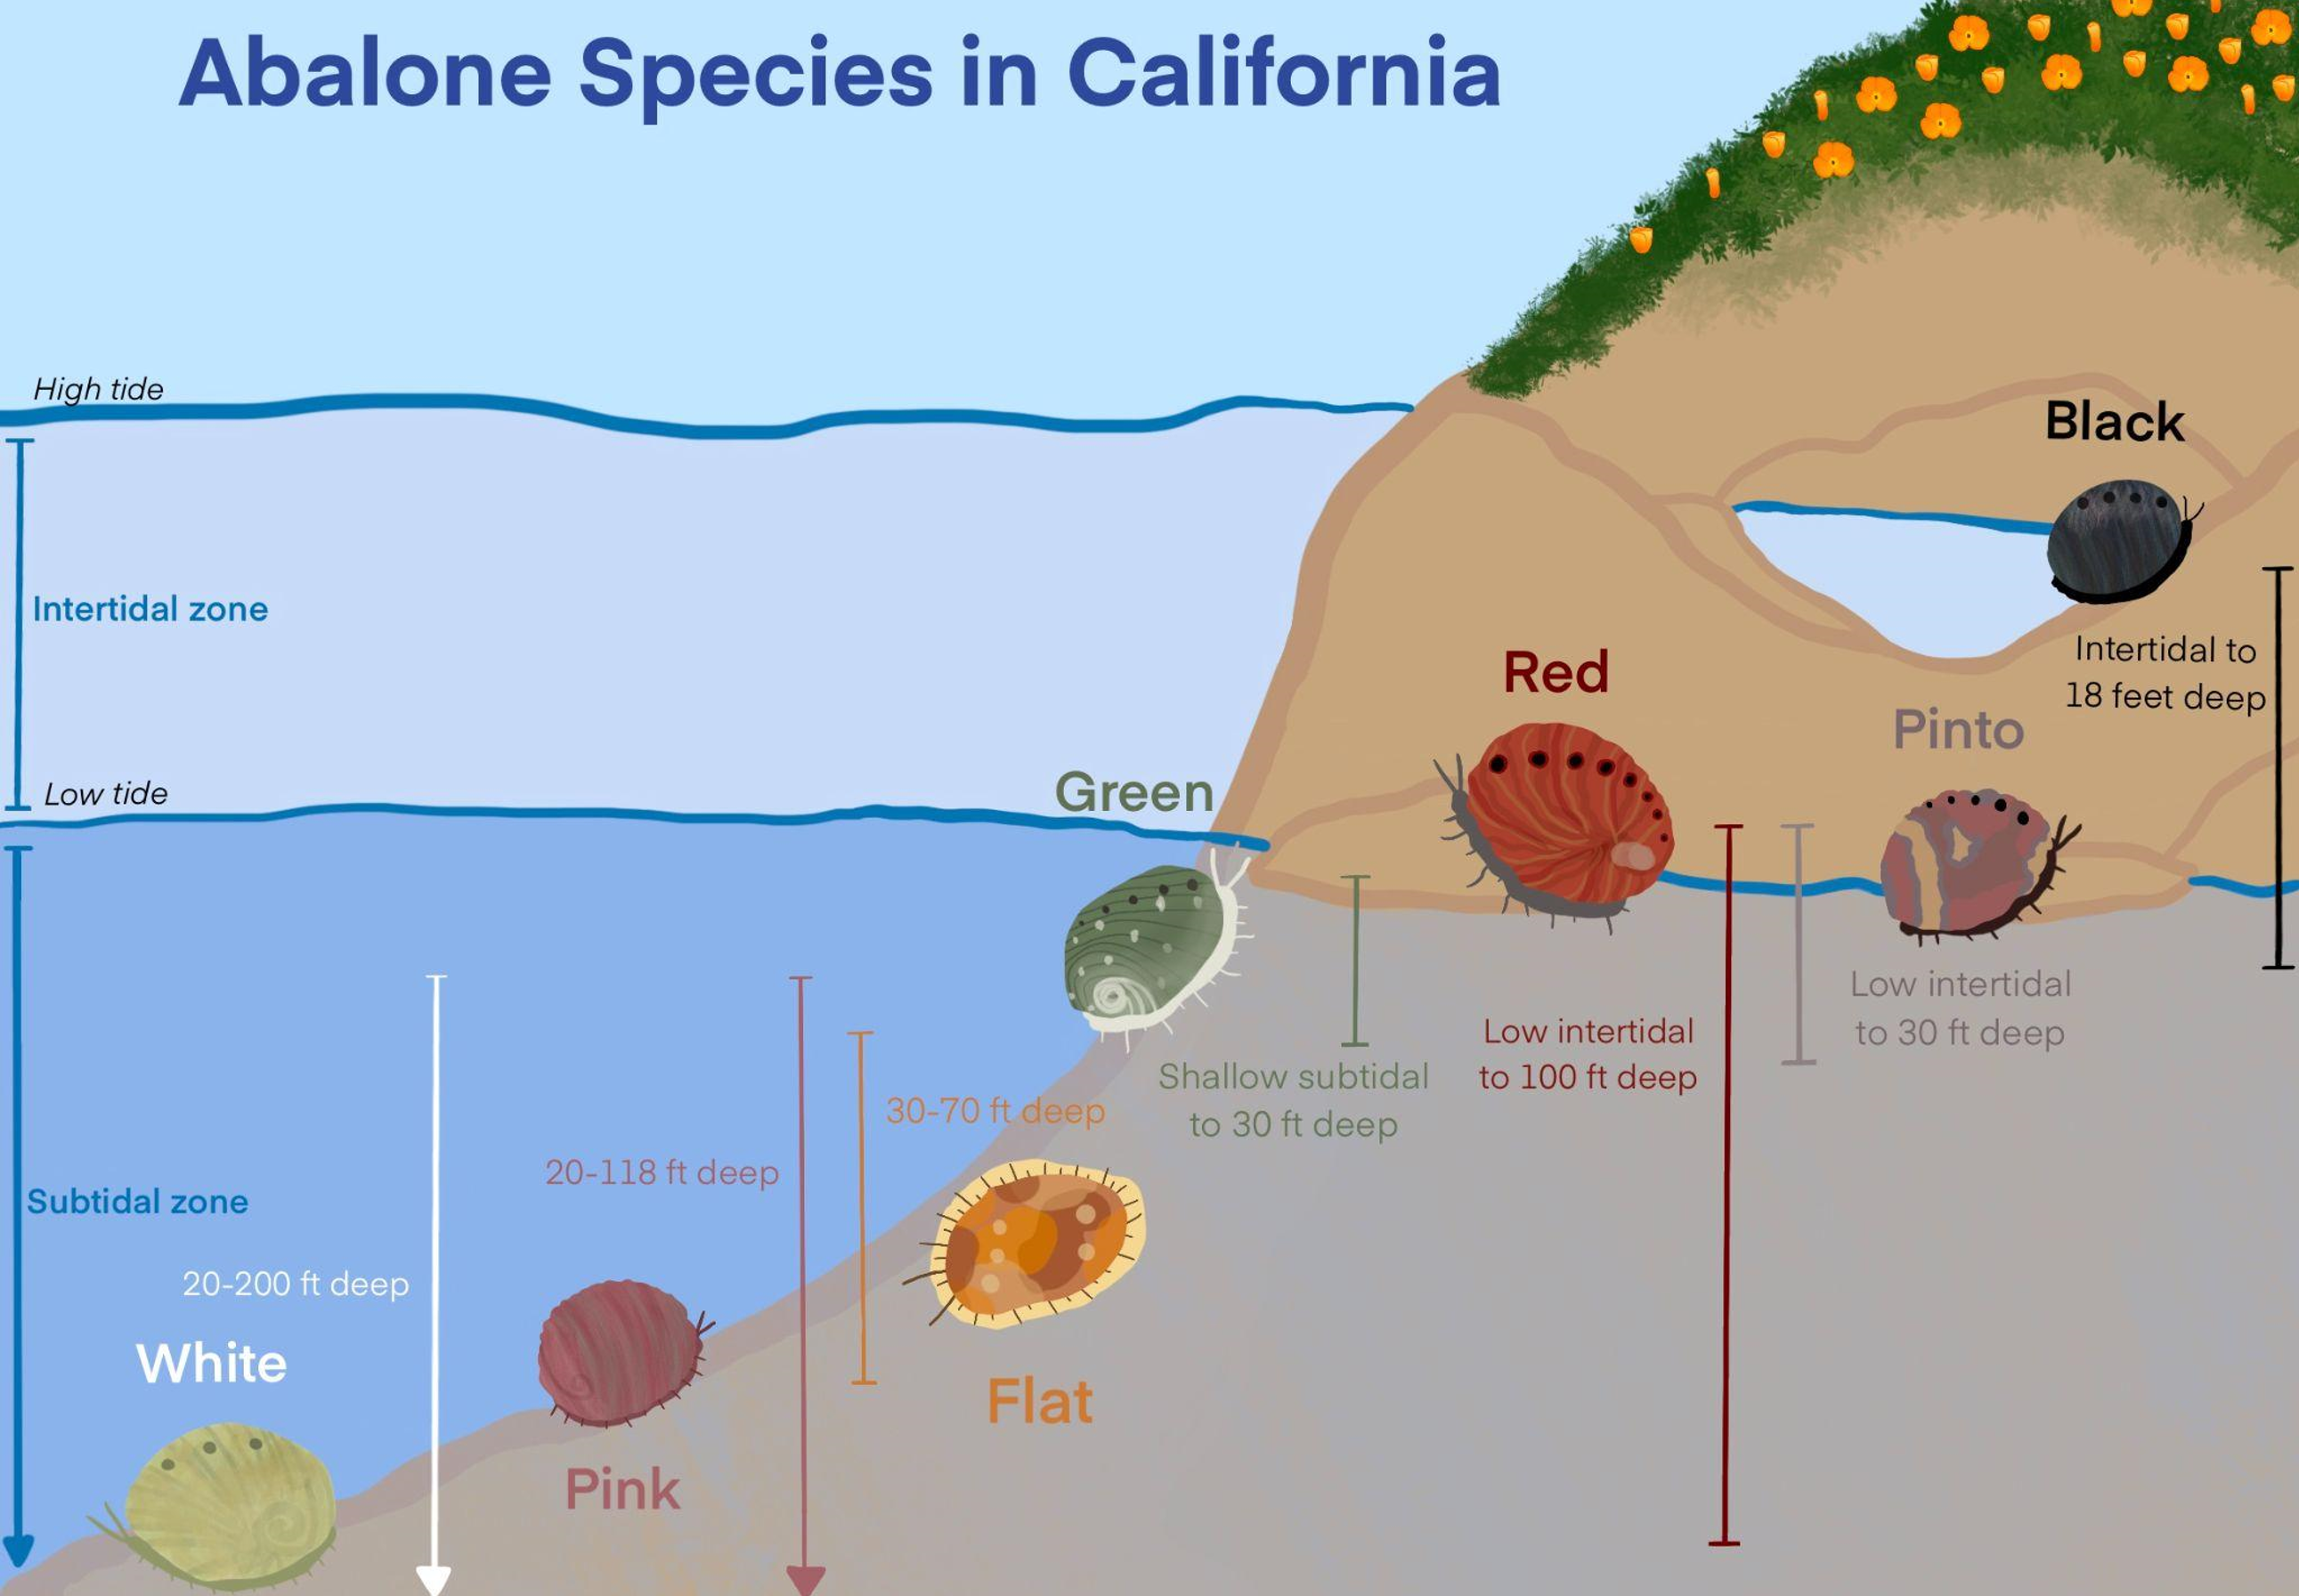 Diagram of California abalone by habitat. Black abalone are the most shallow (intertidal–18 ft deep); then pinto (intertidal–30 ft), red (low intertidal-100 ft), green (shallow subtidal–30 ft), flat (30–70 ft), pink (20–118 ft), and white (20–200 ft).